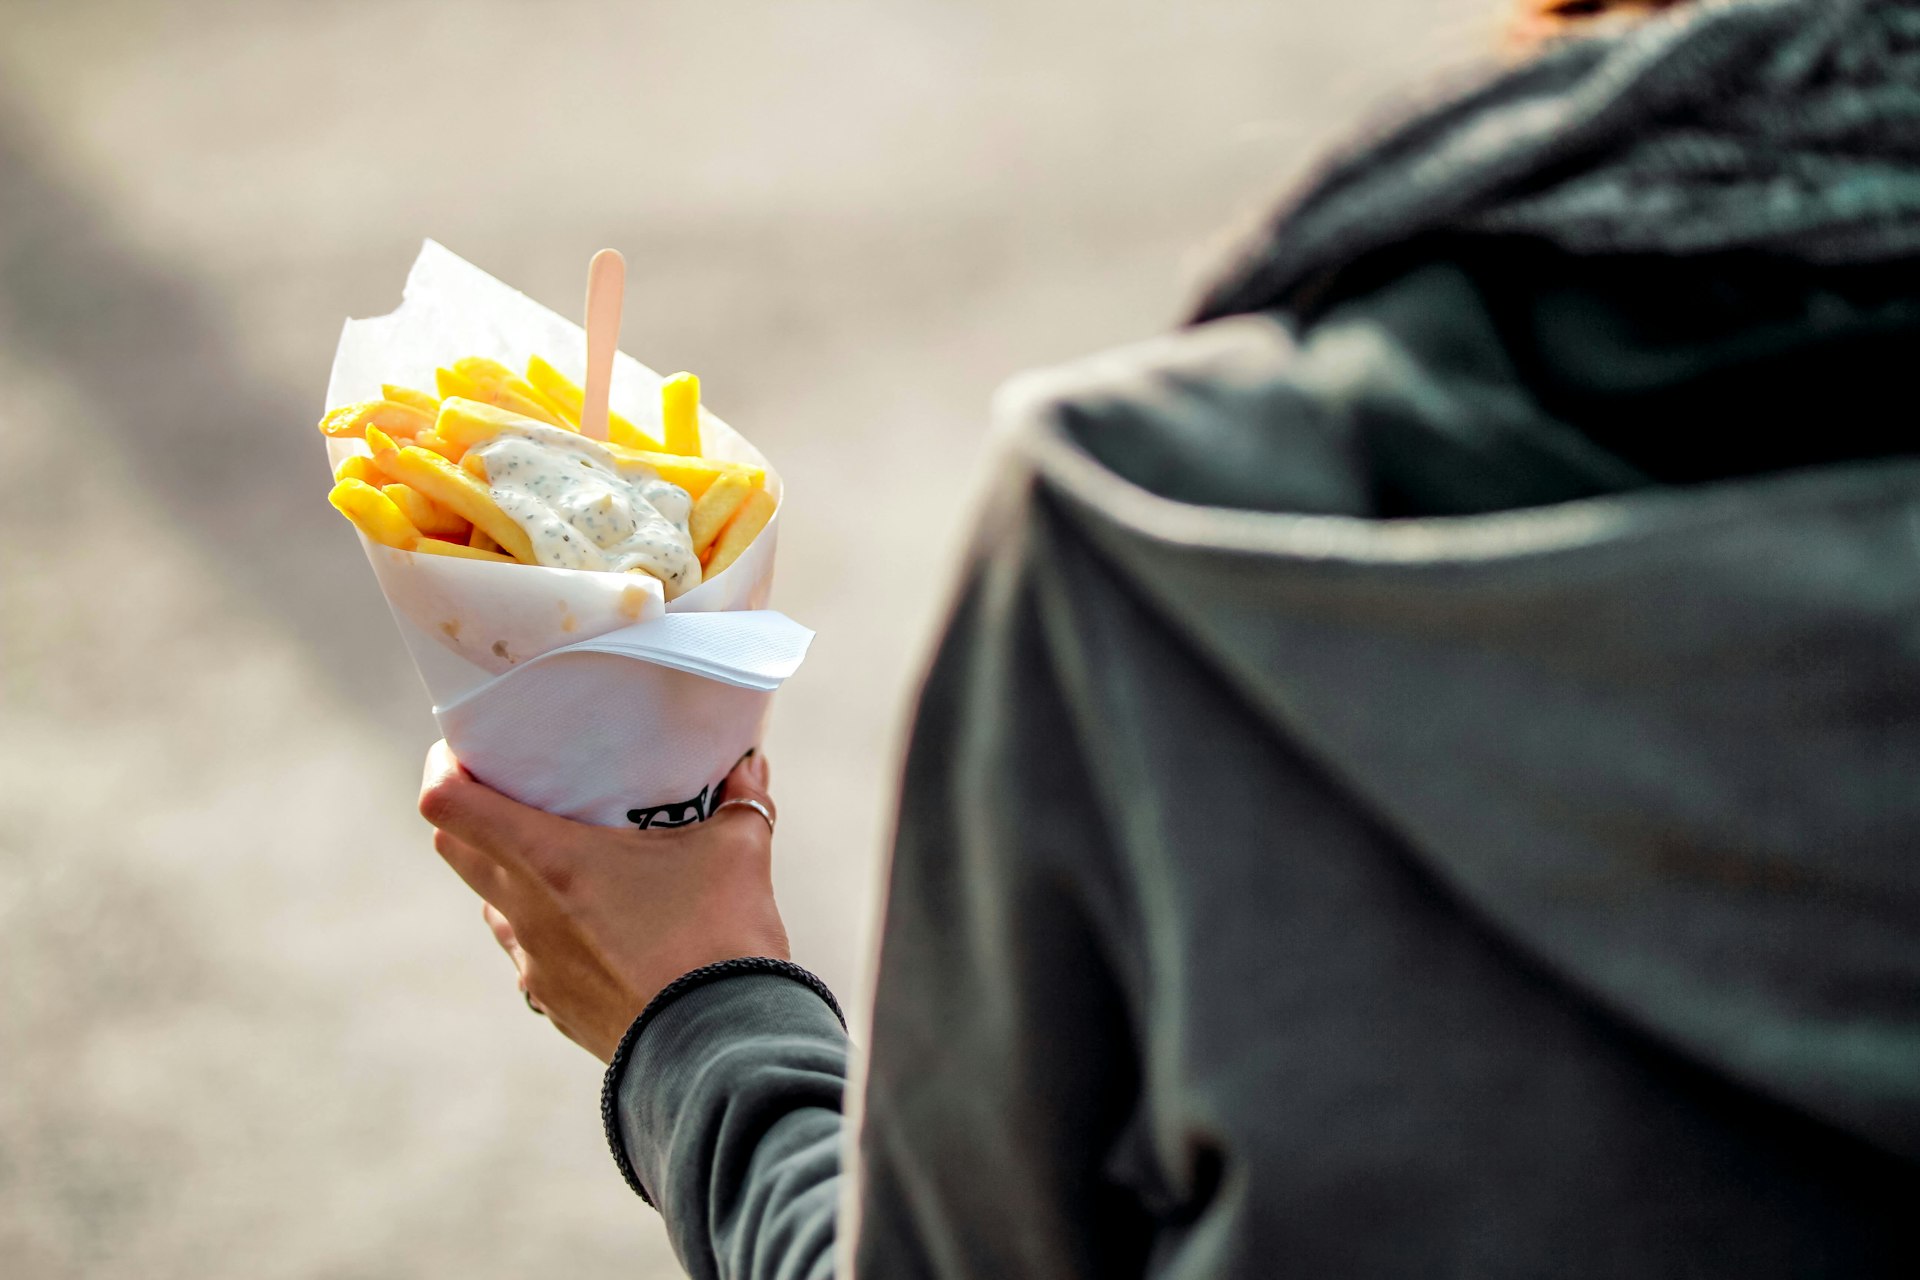 A person walks along a street holding fries in a paper cone